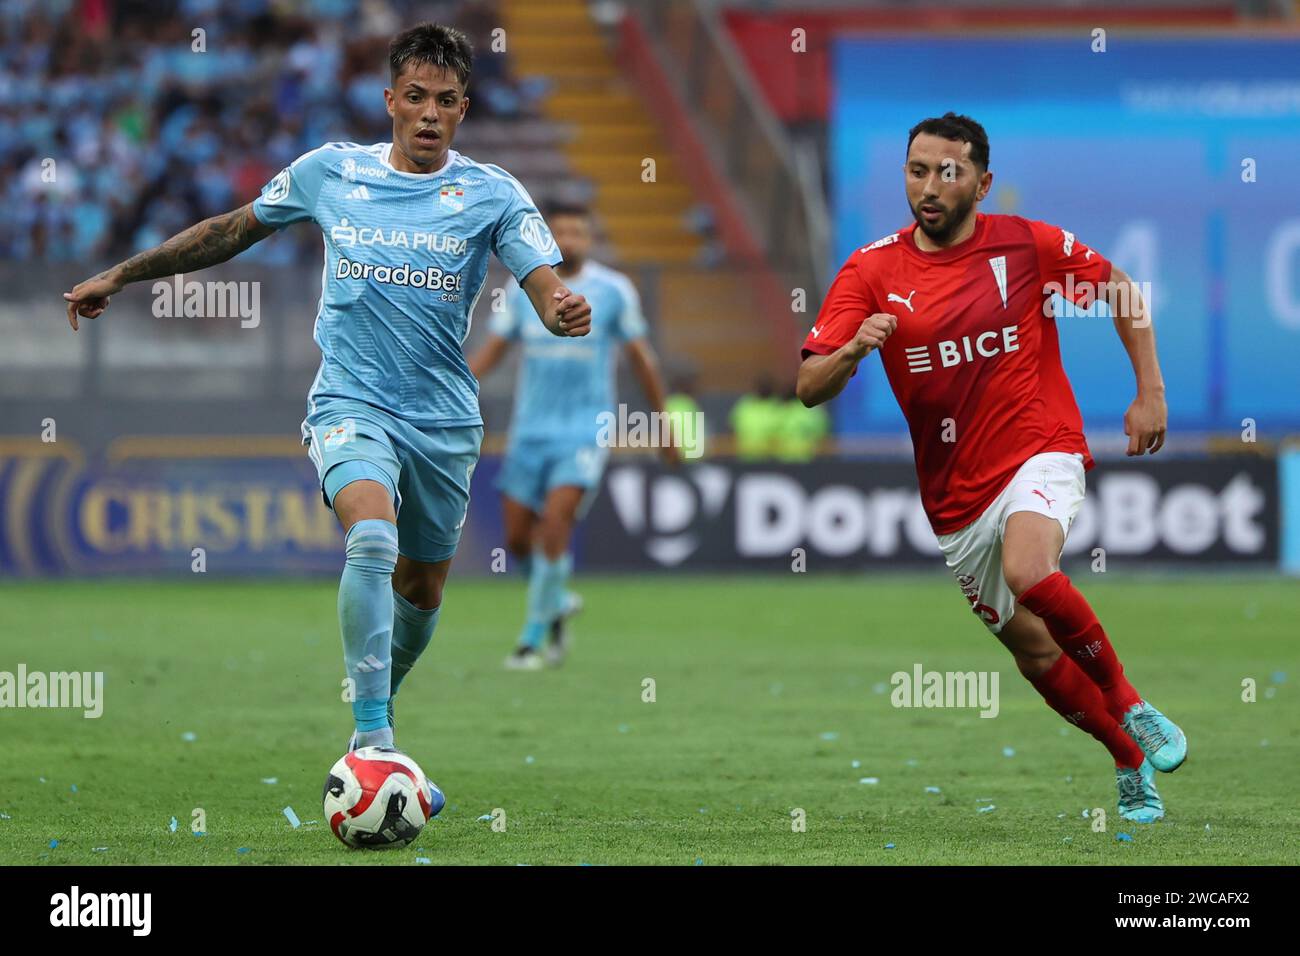 Lima, Peru. 14th Jan, 2024. Santiago Gonzalez of Sporting Cristal during the friendly match between Sporting Cristal and Universidad Catolica de Chile played at Nacional Stadium on January 14, 2024 in Lima, Peru. (Photo by Miguel Marrufo/PRESSINPHOTO) Credit: PRESSINPHOTO SPORTS AGENCY/Alamy Live News Stock Photo